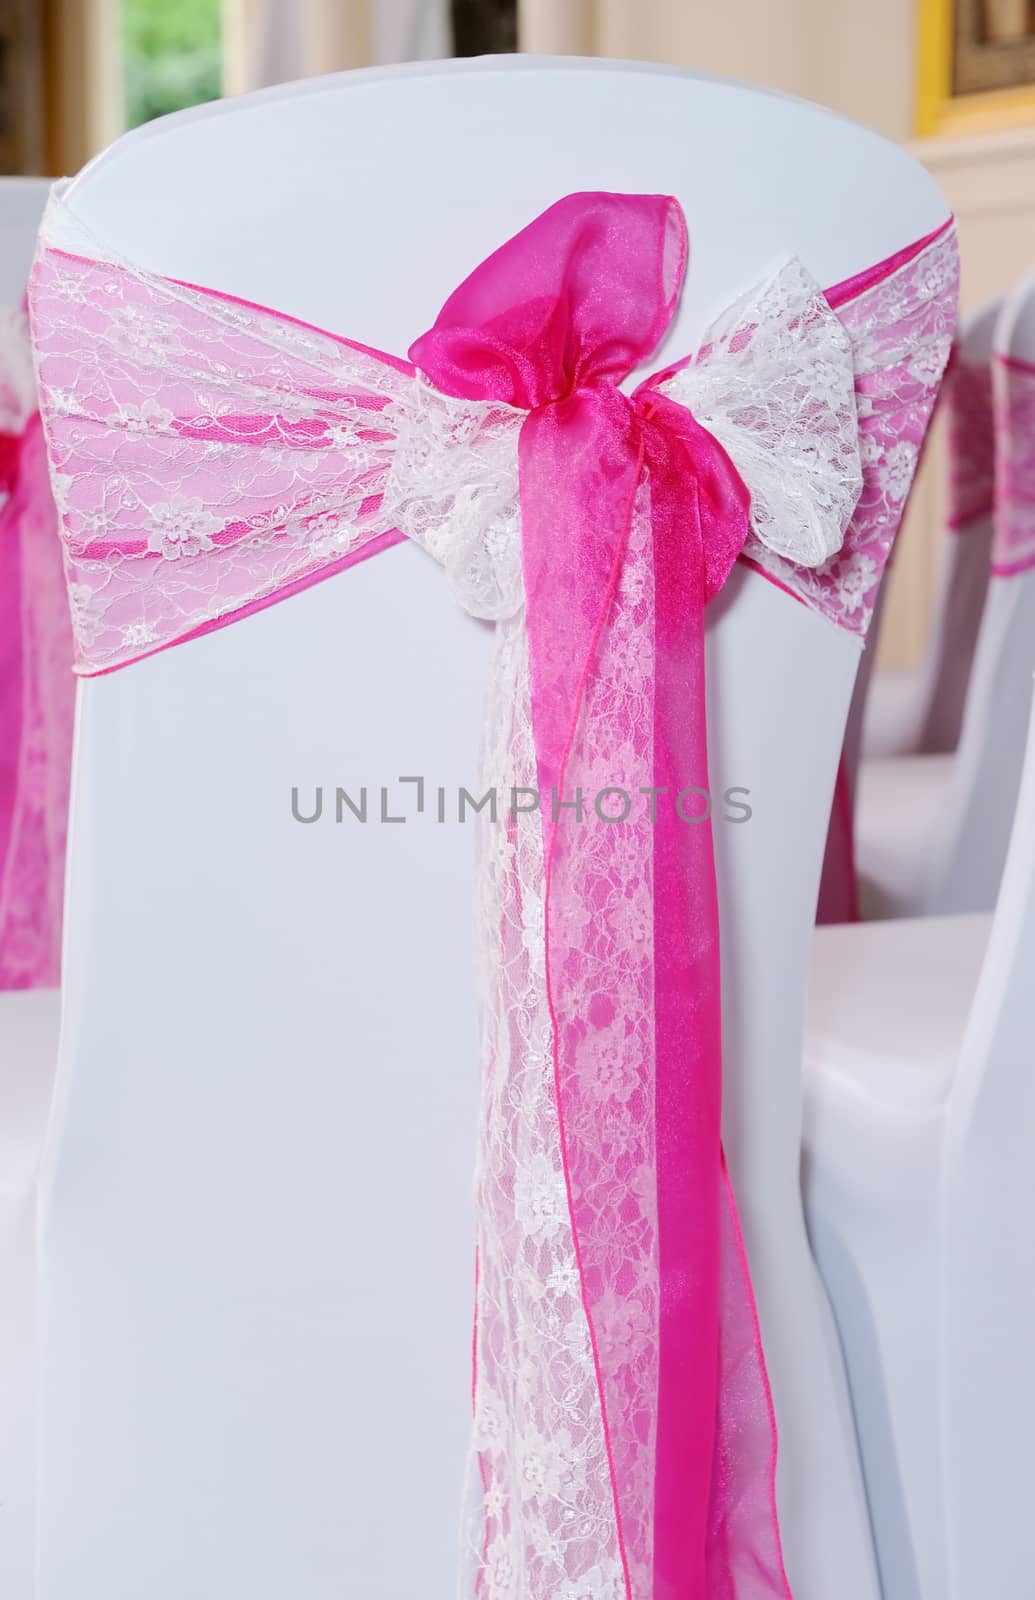 Pink and white chair cover at wedding ceremony showing closeup bow detail